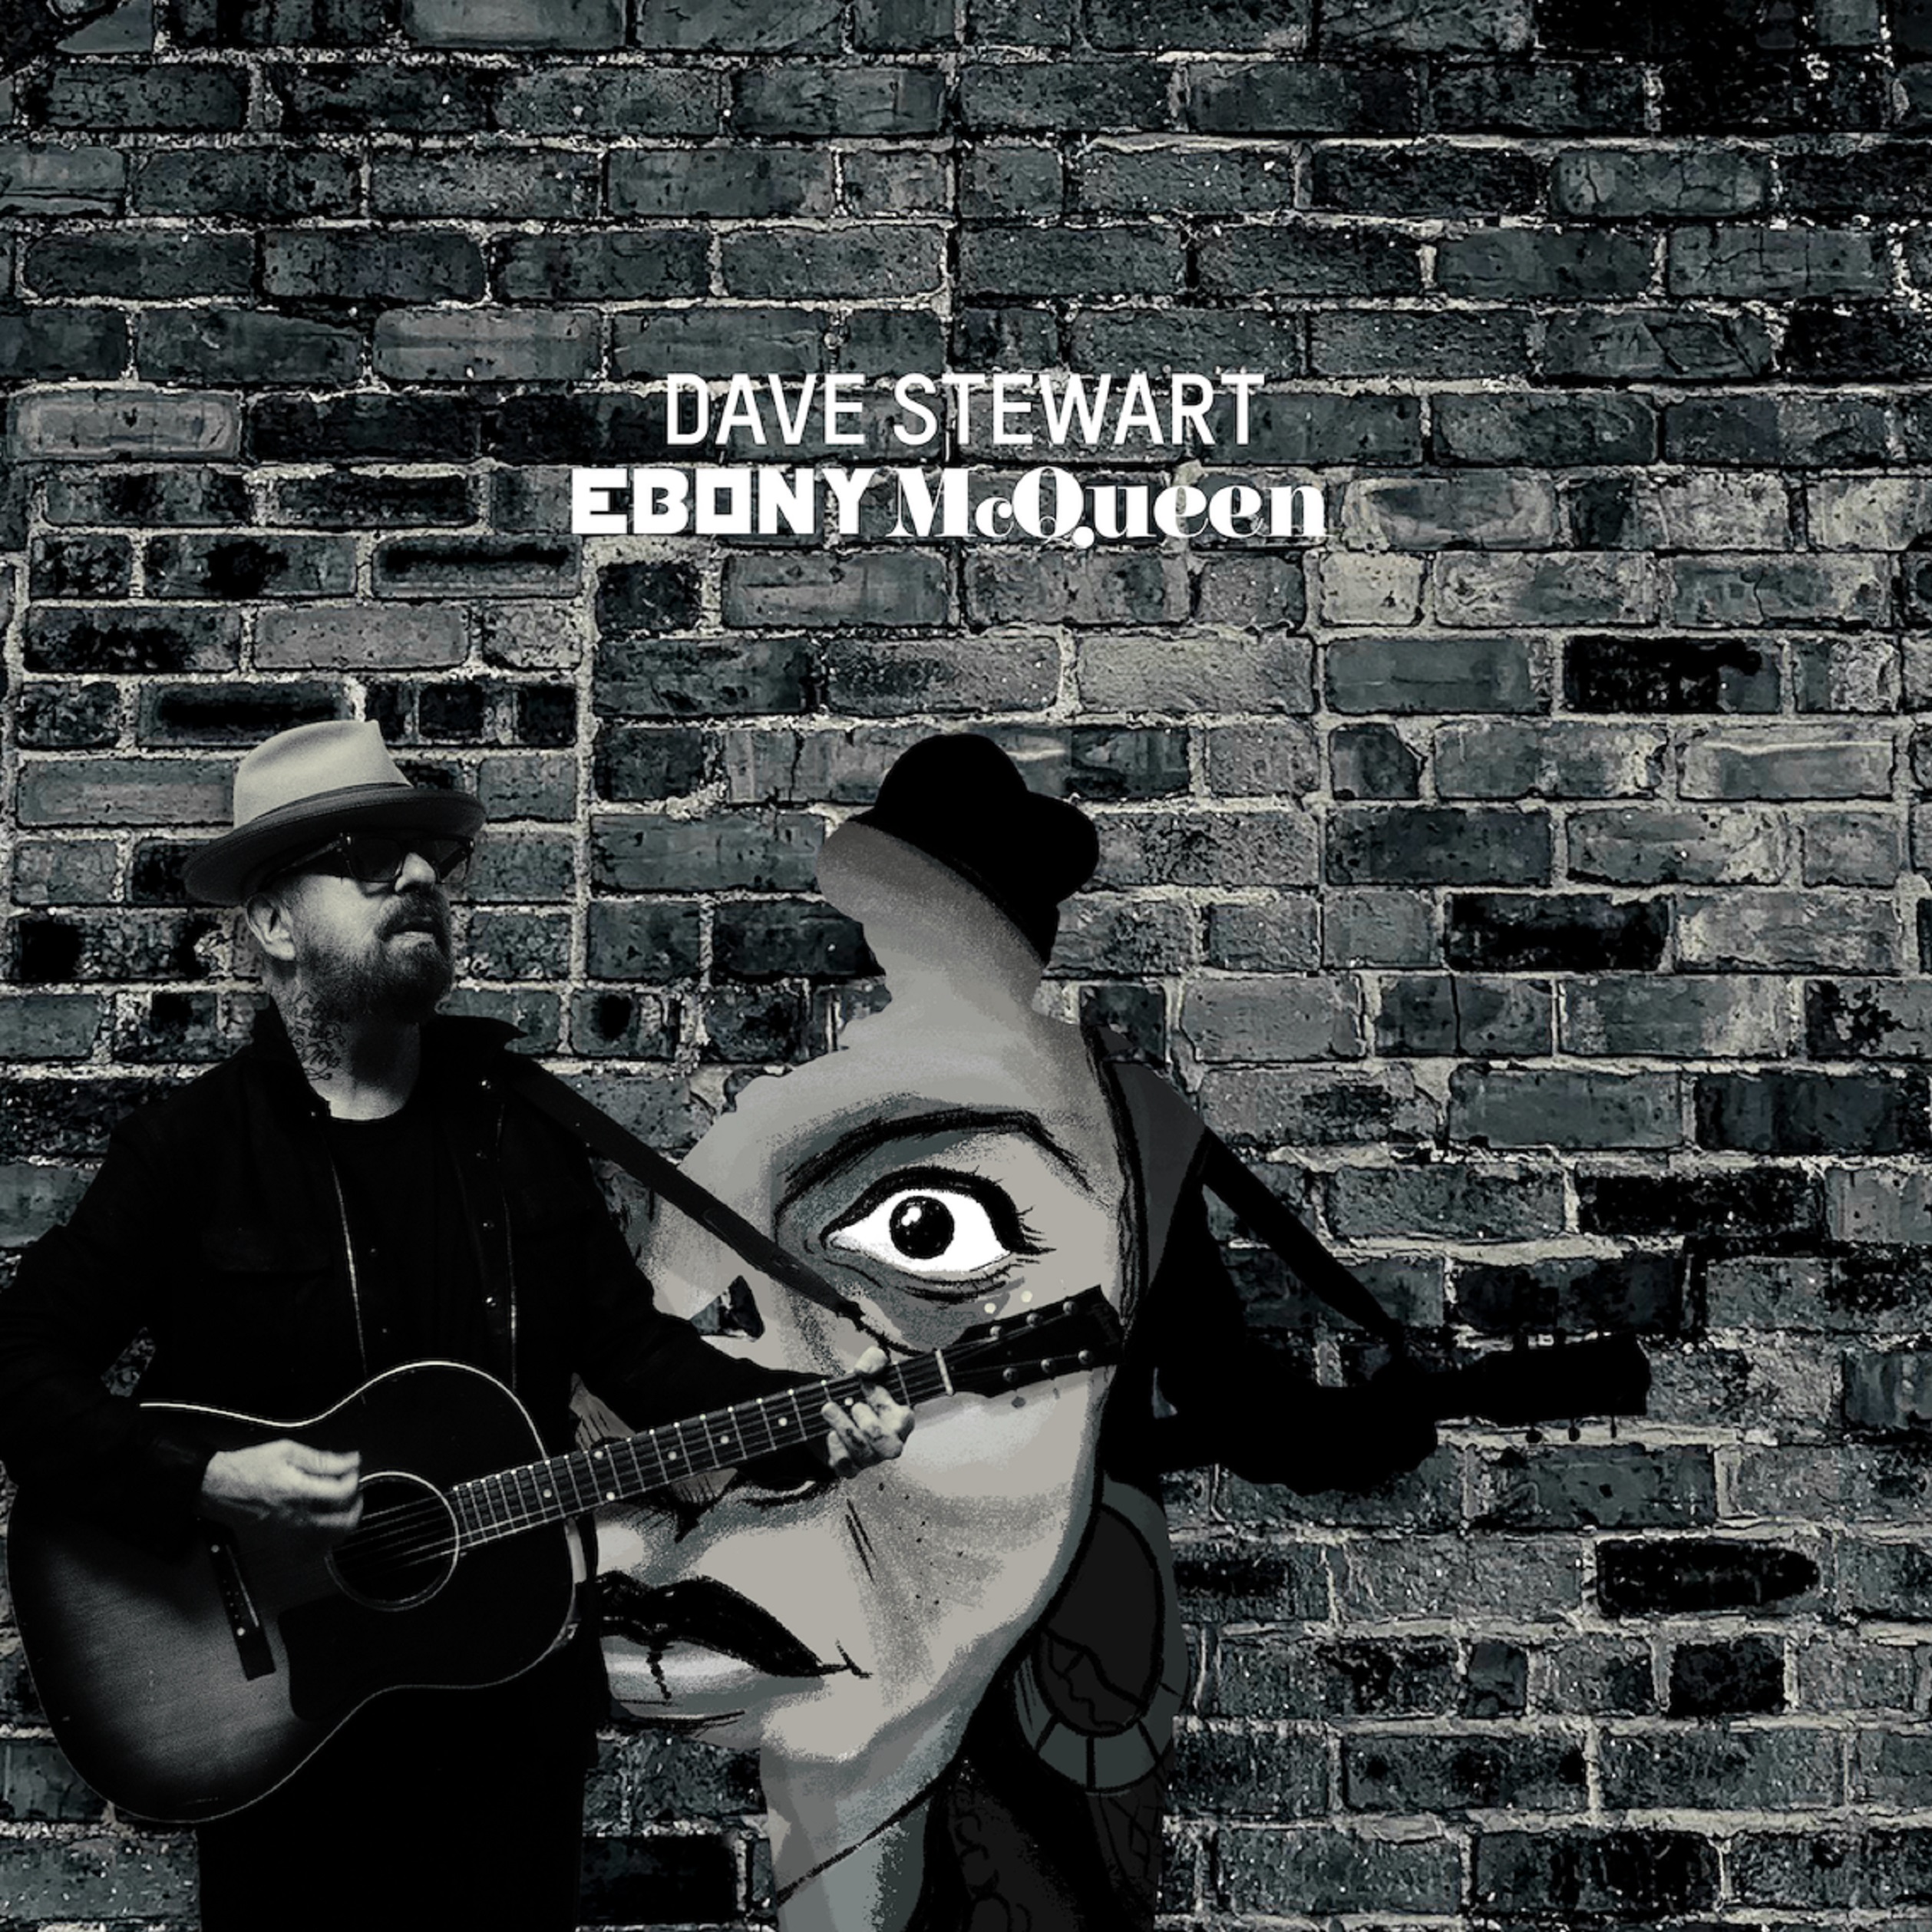 Dave Stewart Releases New Single, "Ebony McQueen," Today (May 13)